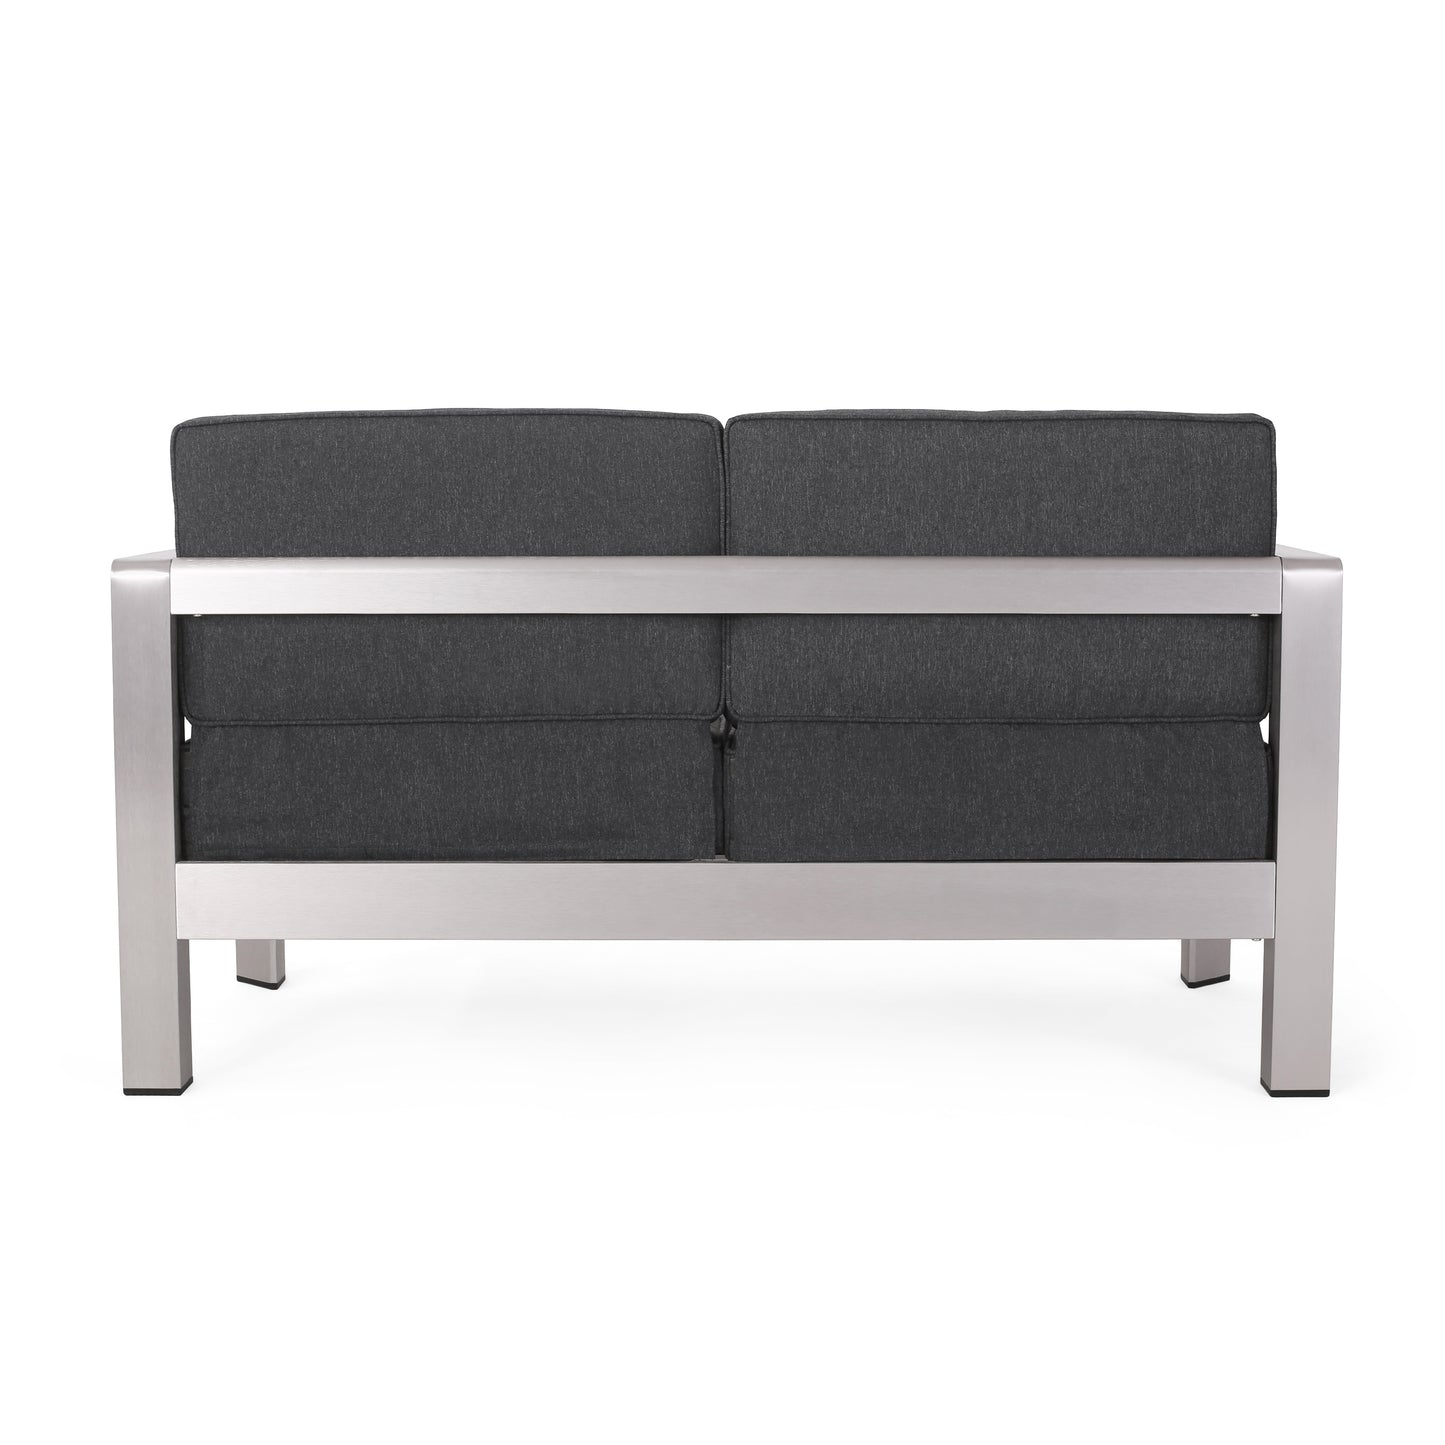 Alec Outdoor Aluminum Loveseat and Tempered Glass-Topped Coffee Table, Silver and Gray